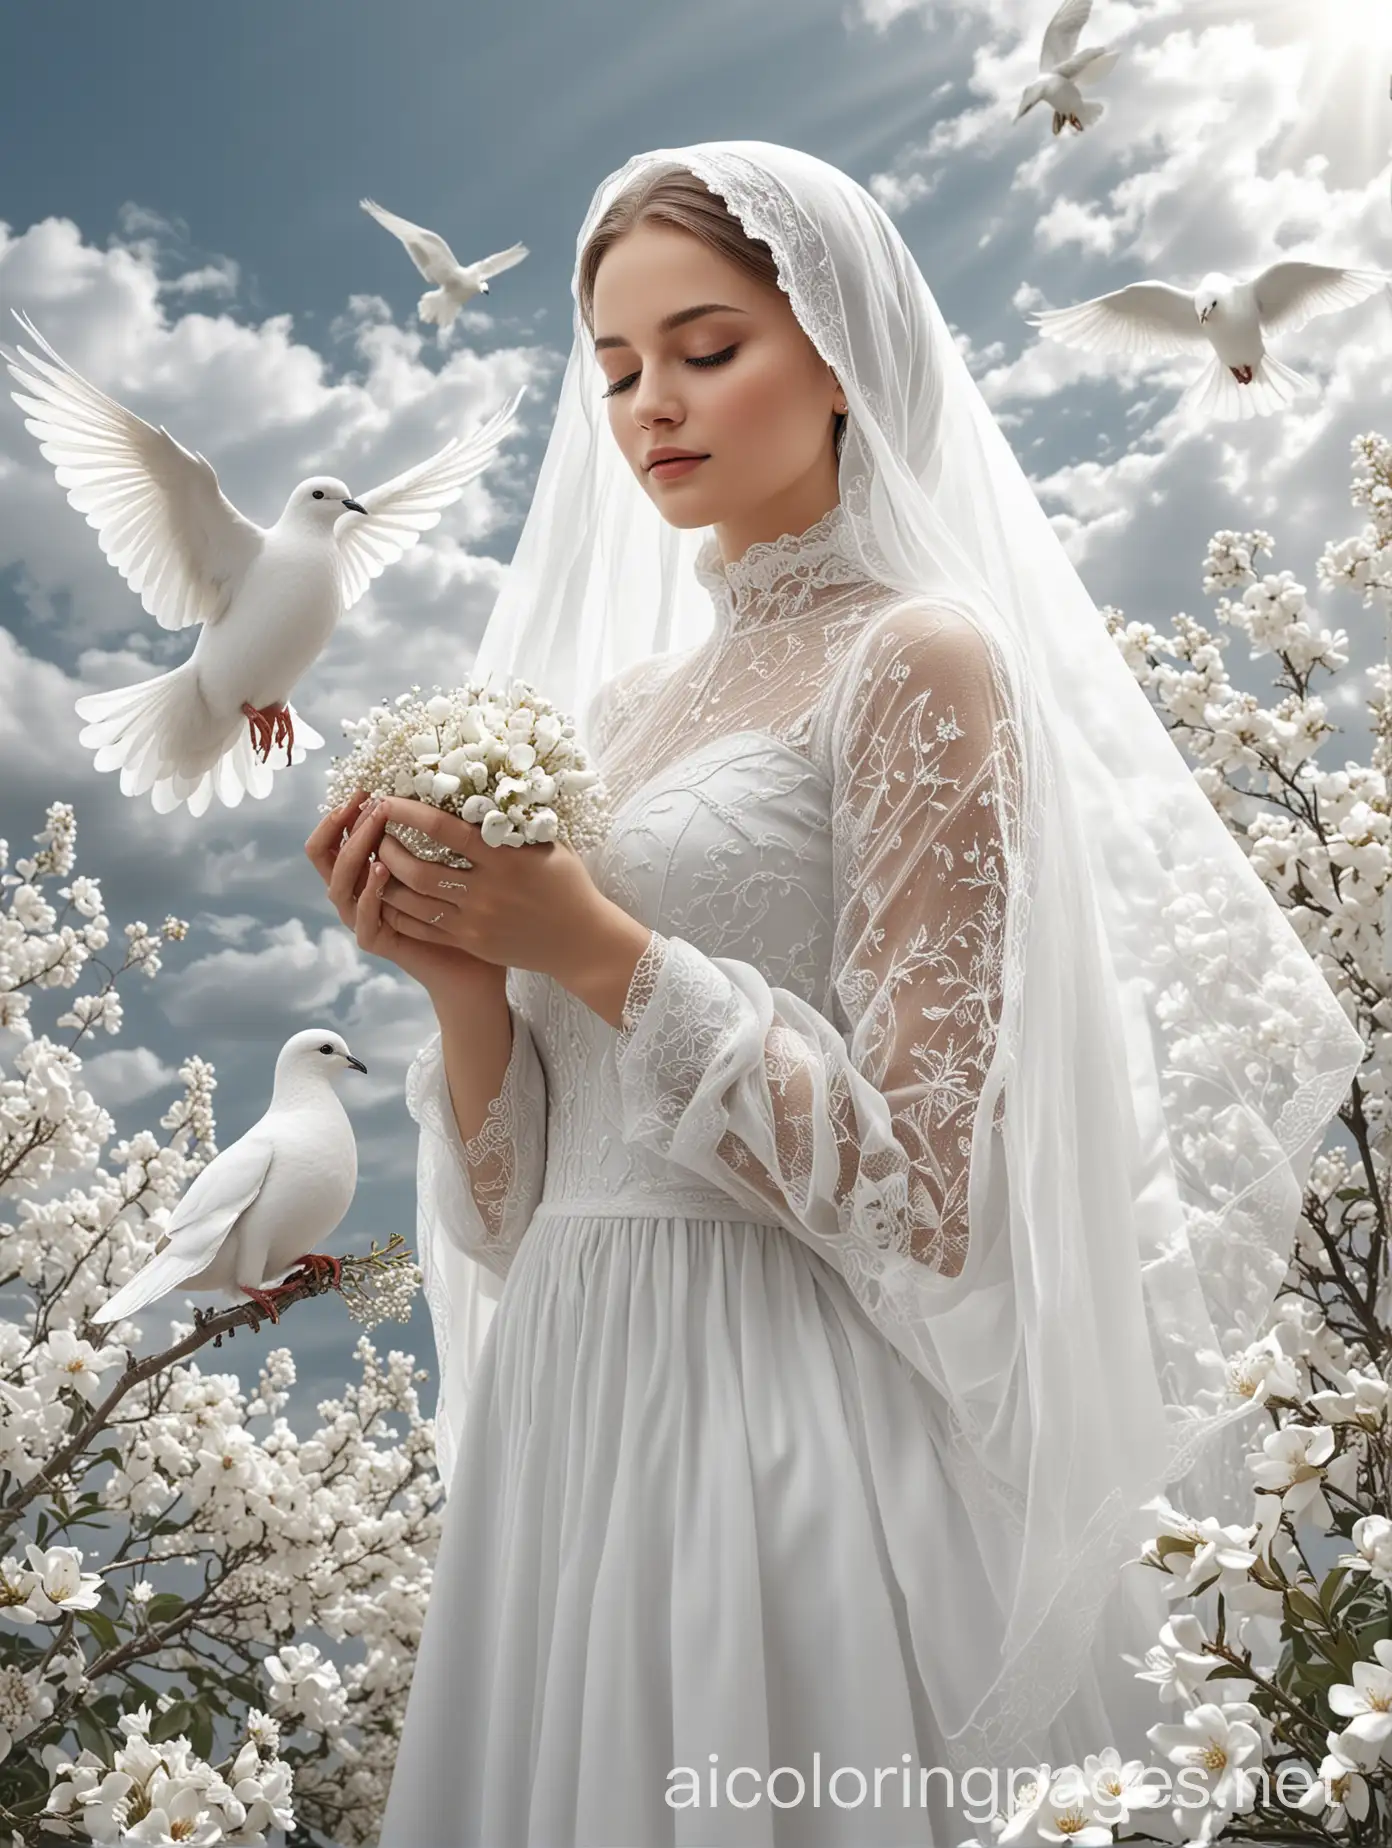 A beautiful veiled girl wearing a long white veil.  She puts some grains in her hand, and a beautiful white dove eats them.  In the background there are flowers.  And the sky is clear.  3D image , Coloring Page, black and white, line art, white background, Simplicity, Ample White Space. The background of the coloring page is plain white to make it easy for young children to color within the lines. The outlines of all the subjects are easy to distinguish, making it simple for kids to color without too much difficulty